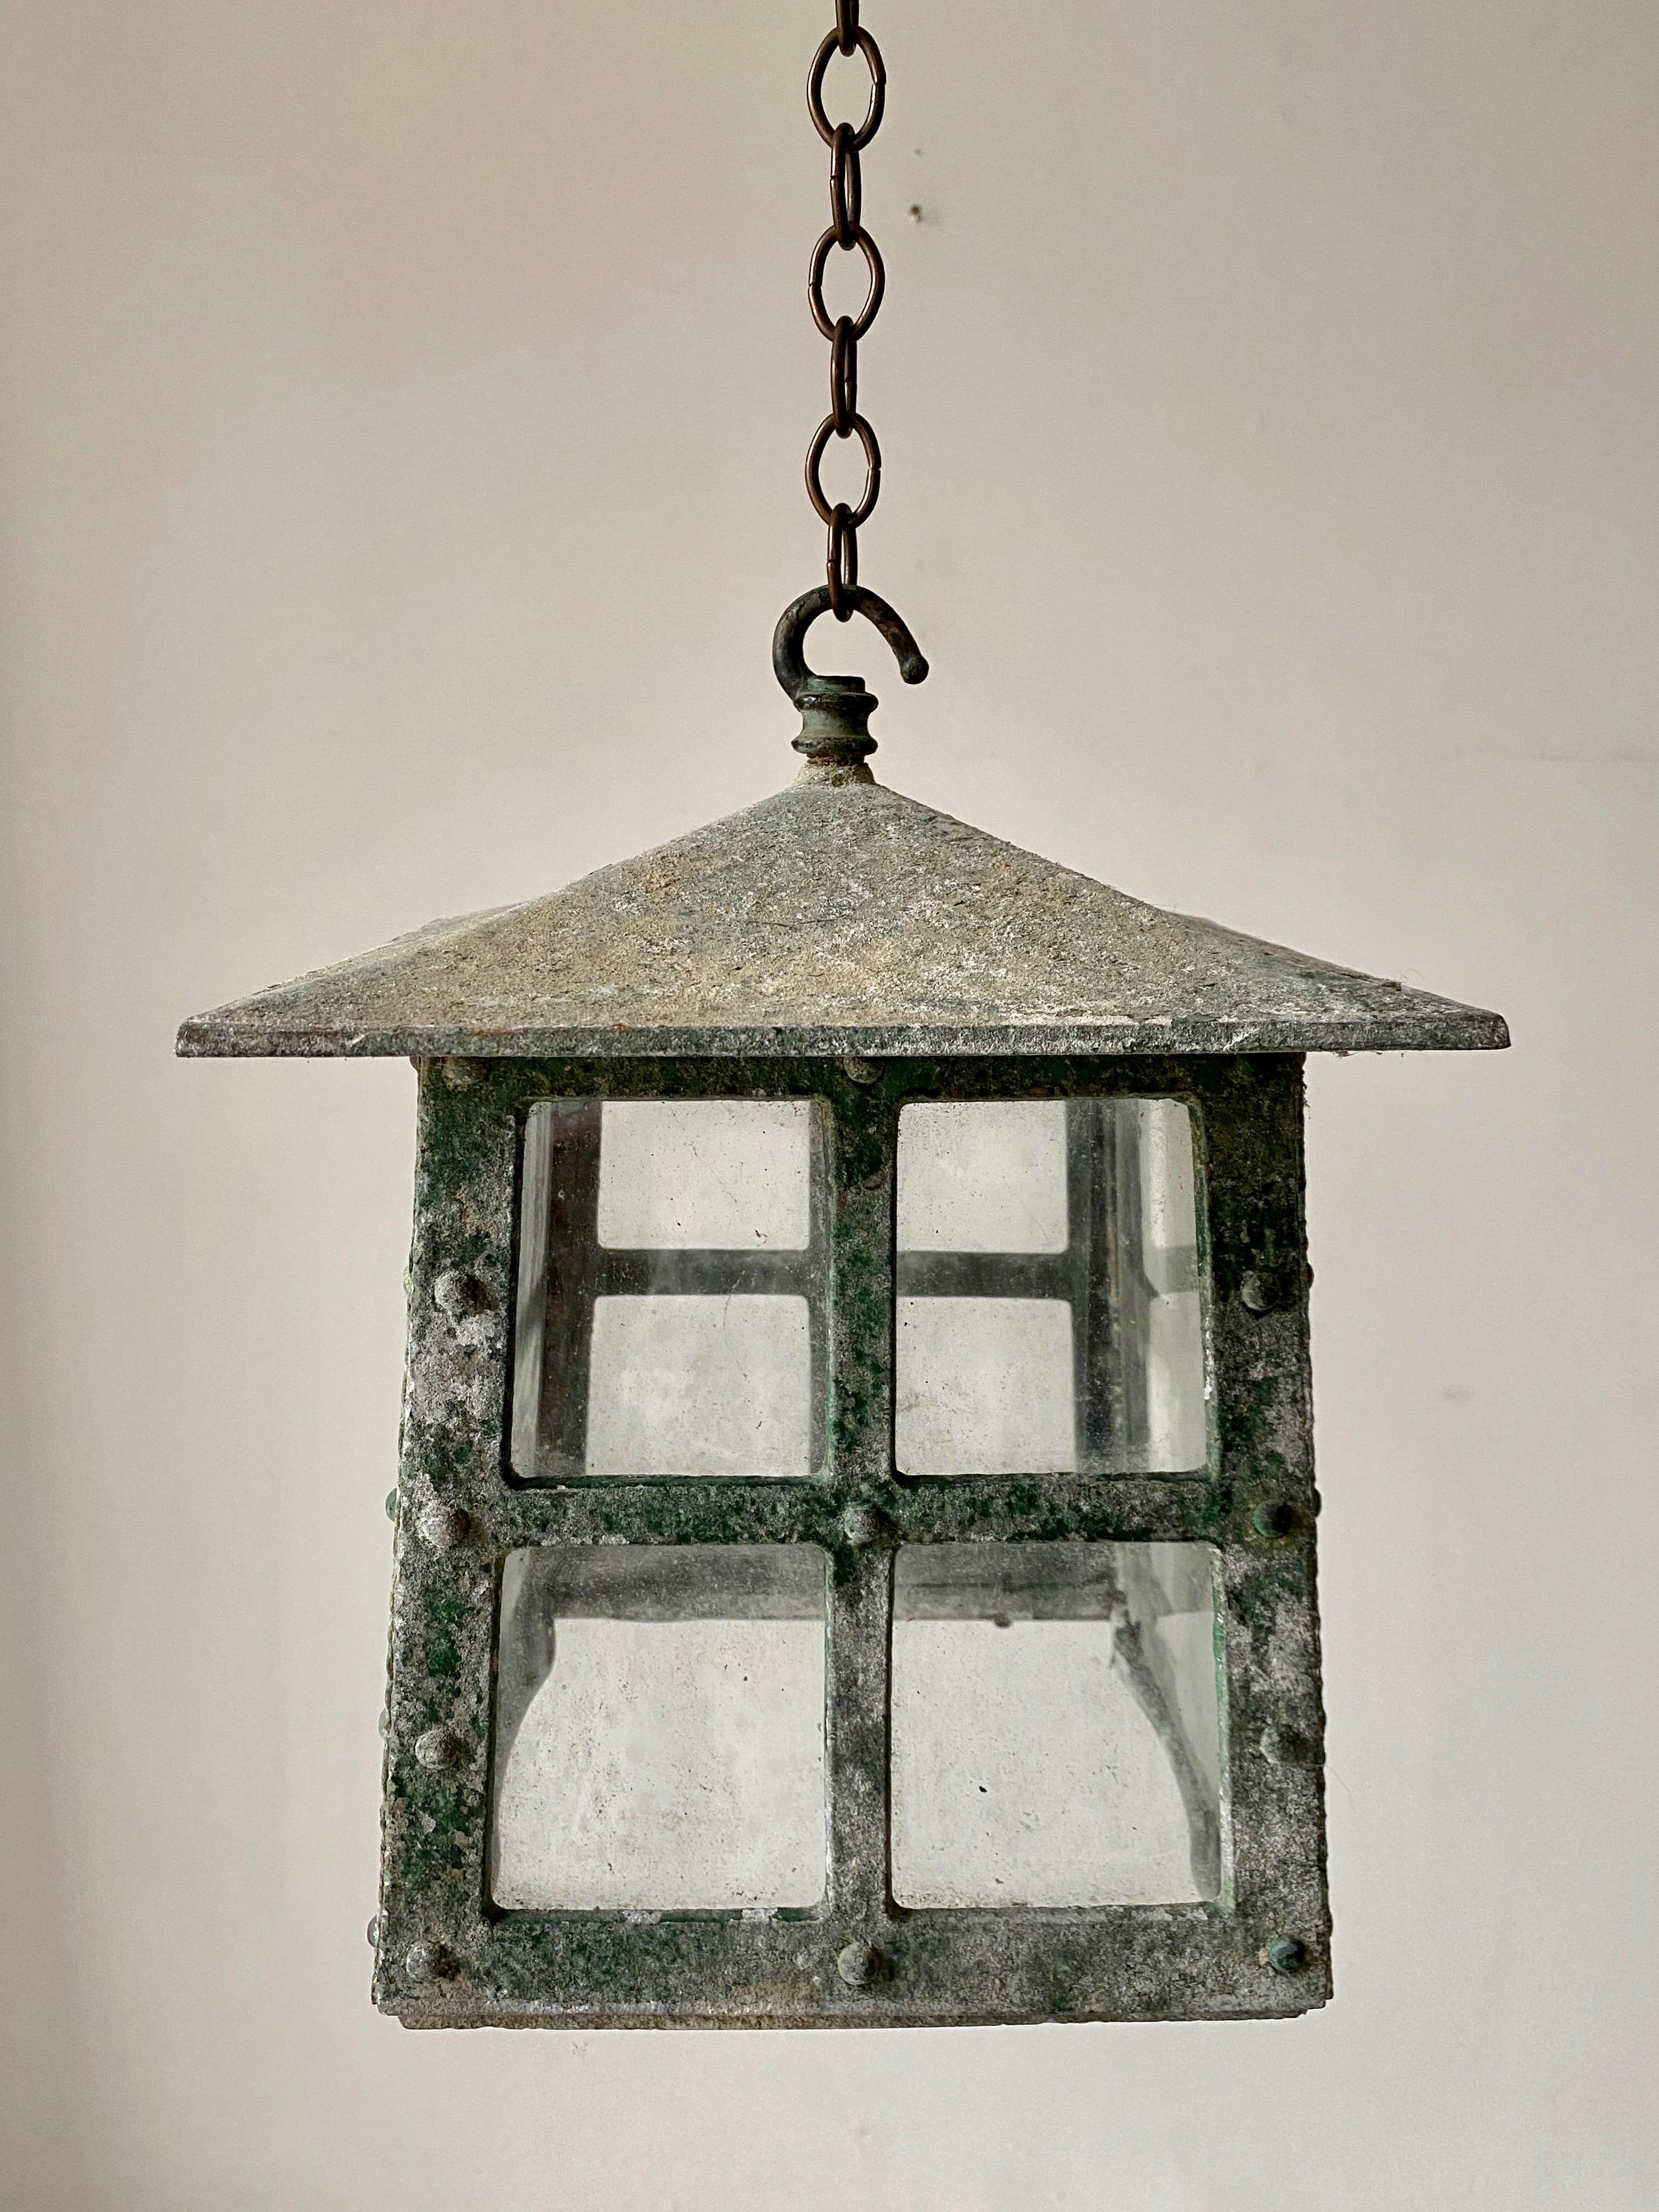 A set of four metal alloy, previously painted, Arts & Crafts lanterns. Riveted body with a typical pagoda form. Original glass. Fabricated circa 1930 in England.
The fabulous patina shows a mottled green, from the paint of yesteryear. Hook fittings